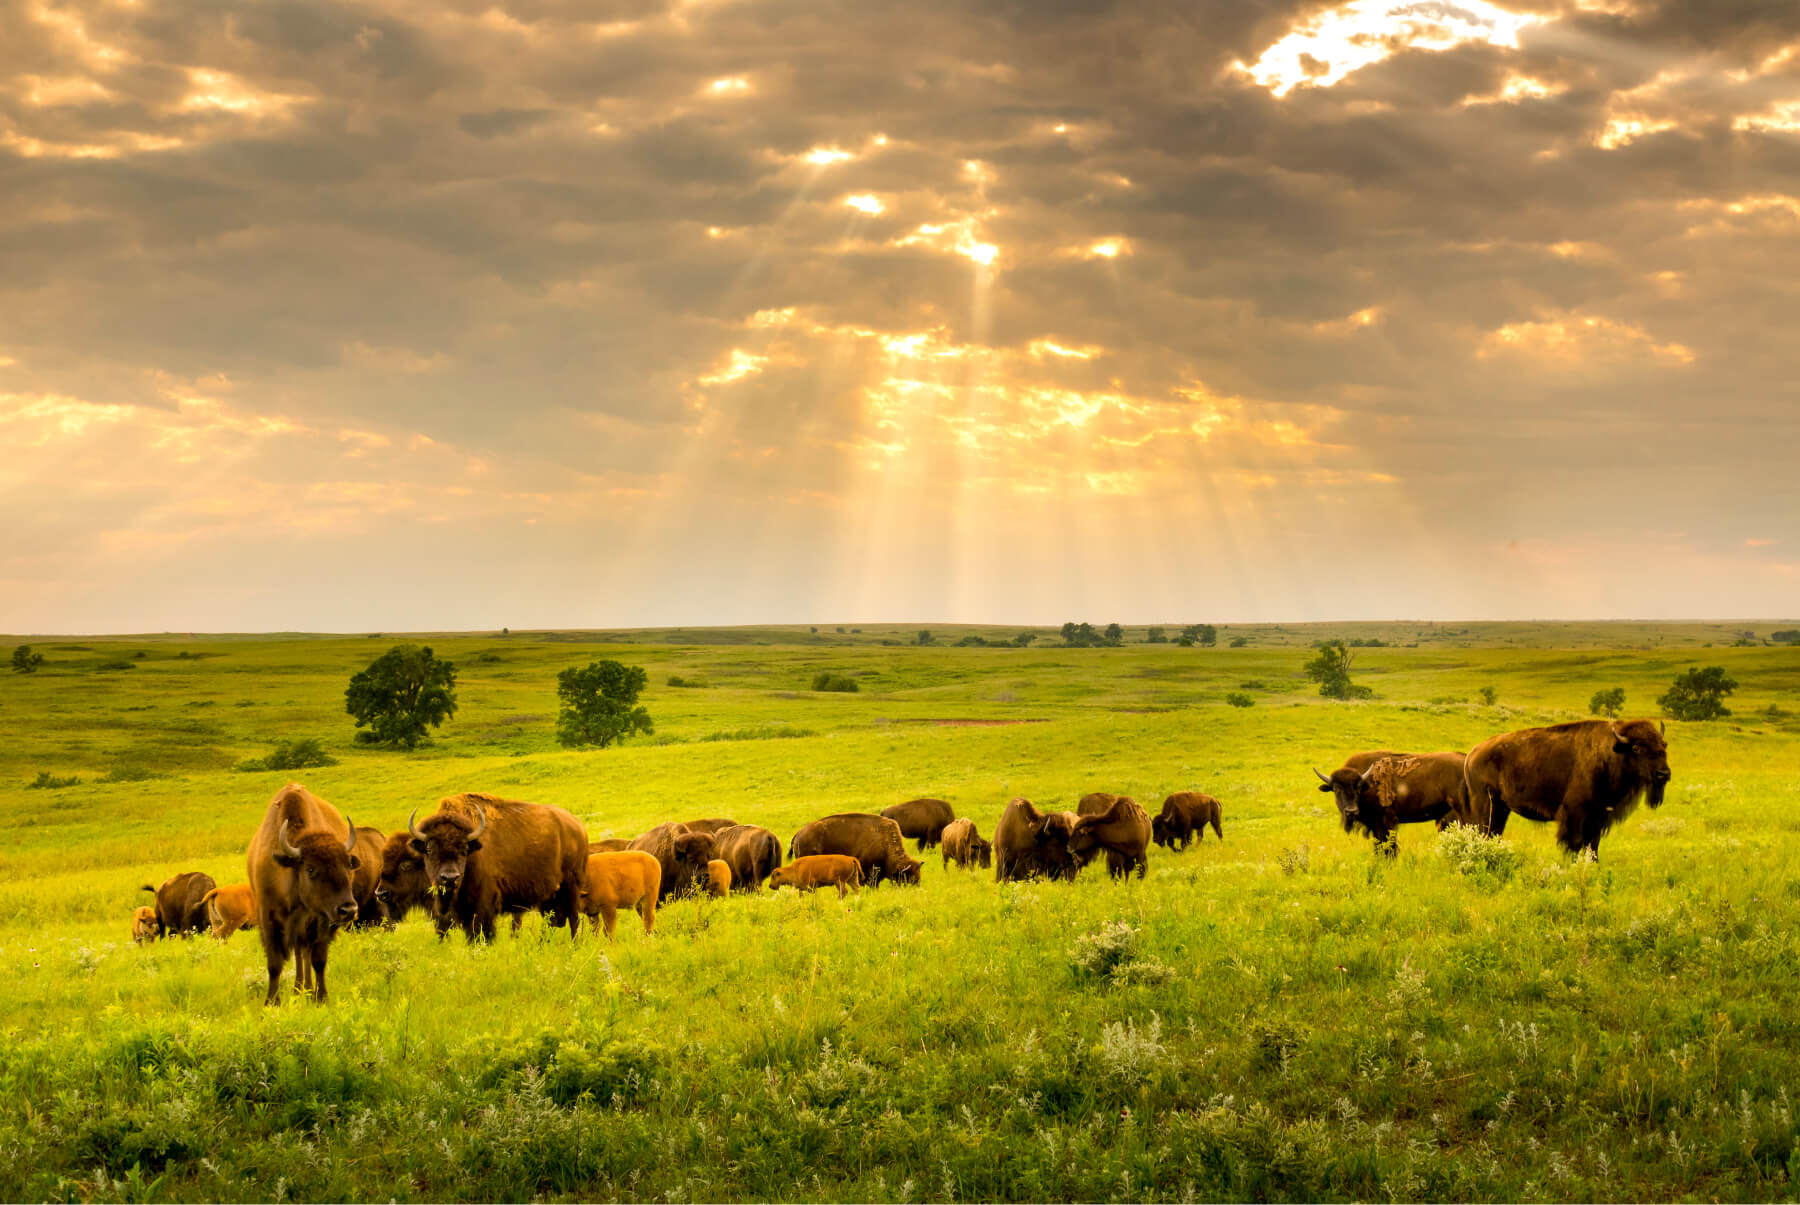 Field of bison